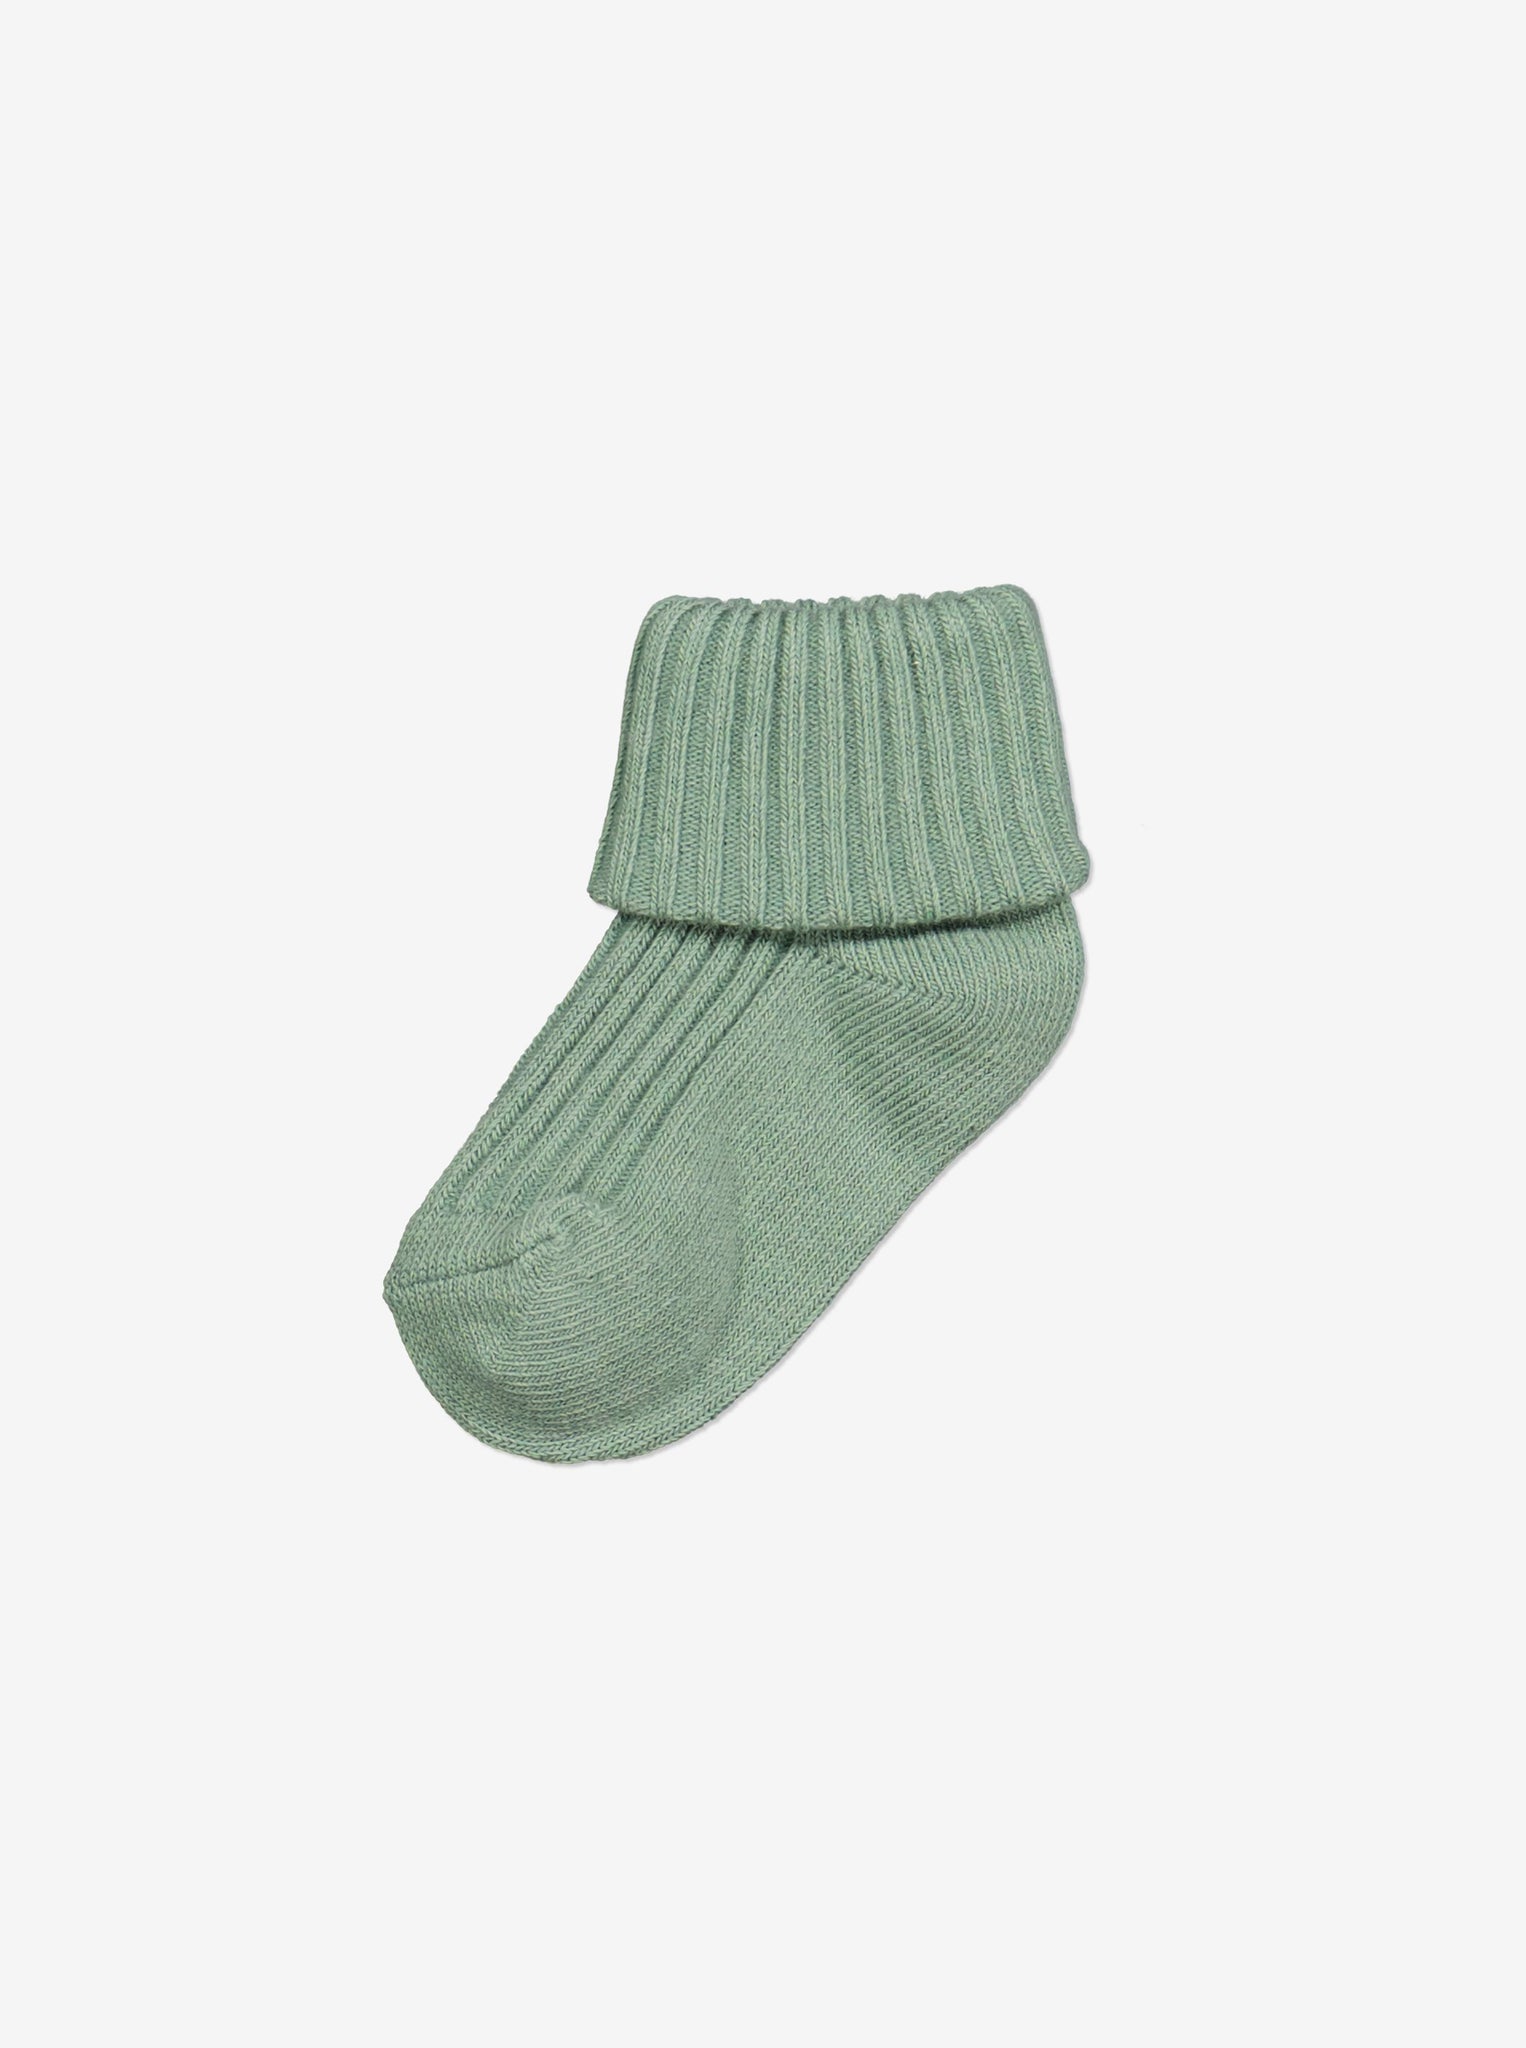  Organic Cotton Green Baby Socks from Polarn O. Pyret Kidswear. Made from environmentally friendly materials.